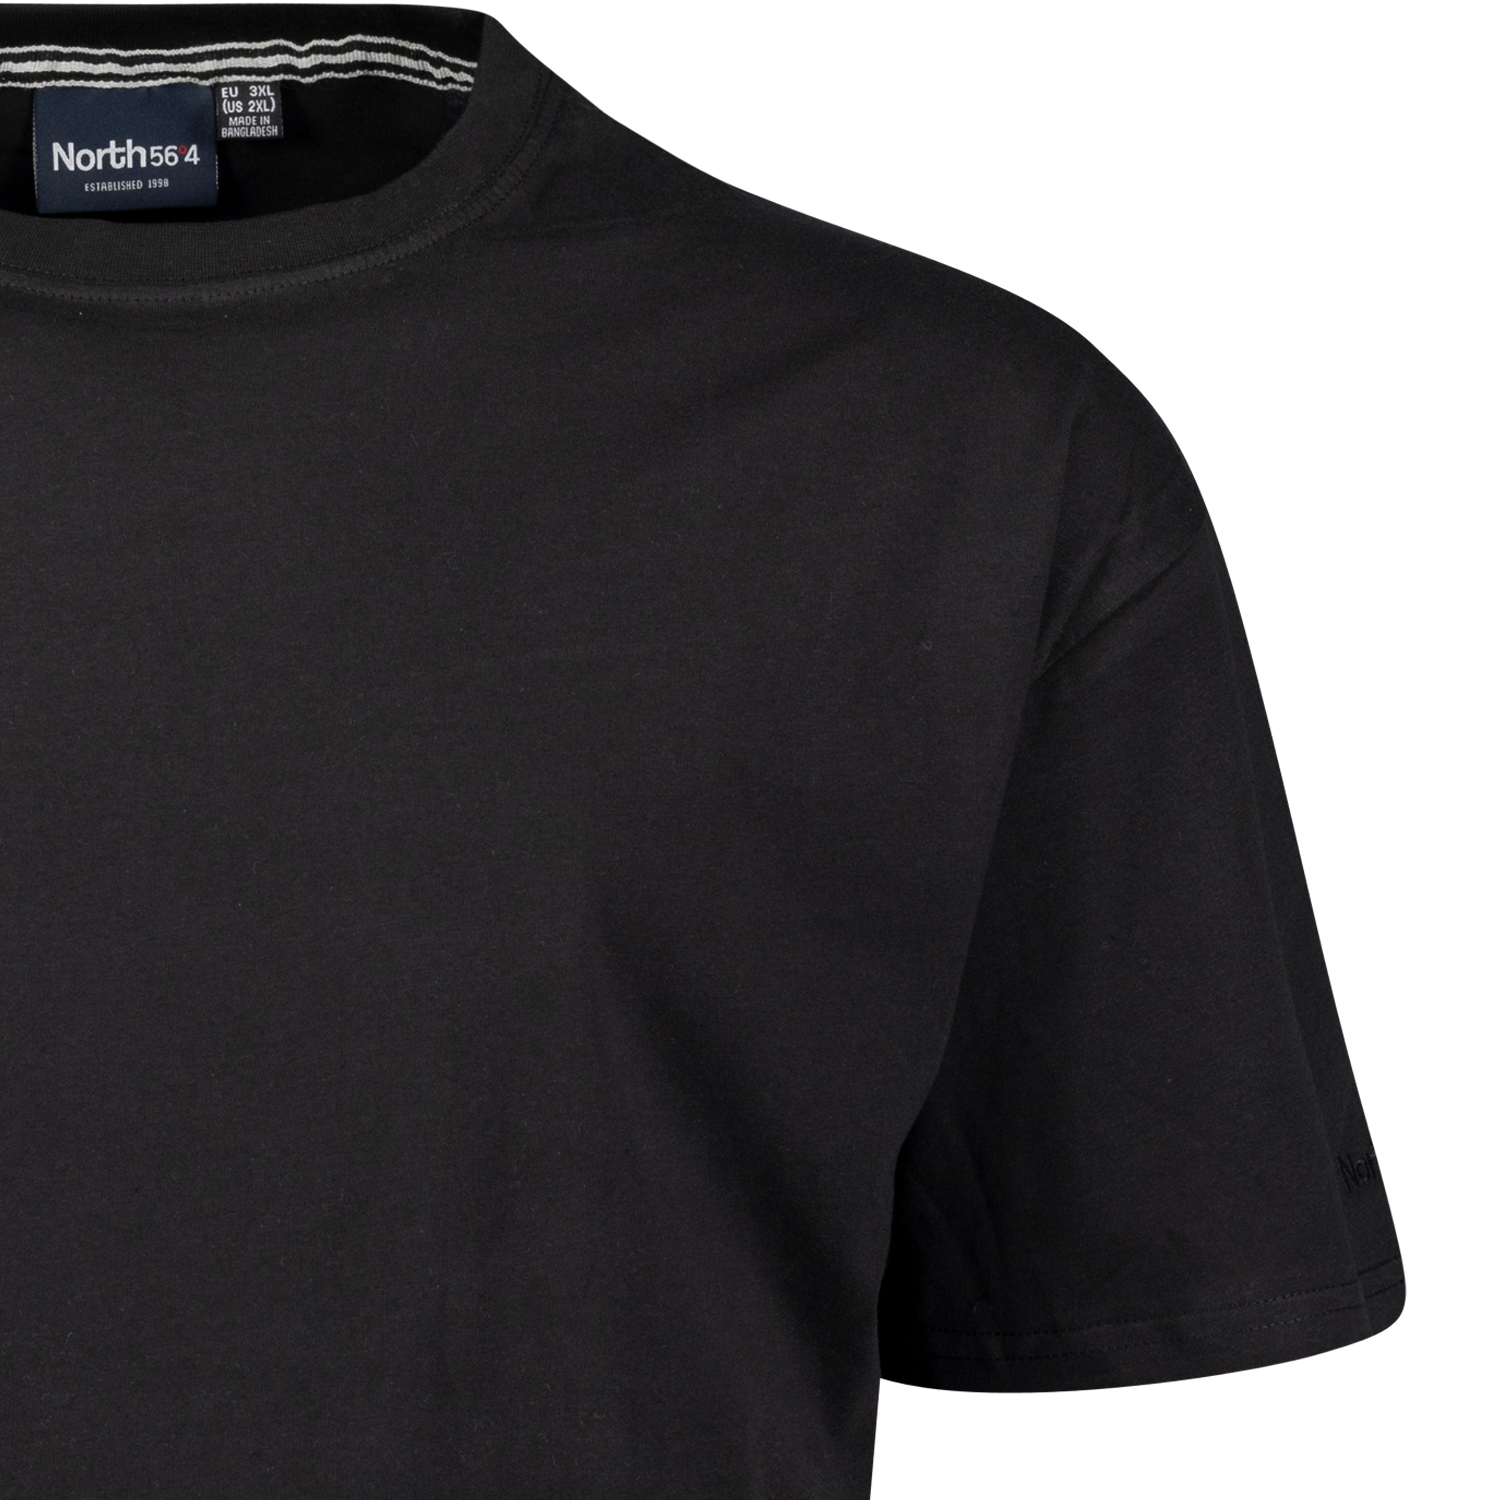 Black basic t-shirt with crew neck by North56°4 in oversizes up to 8XL